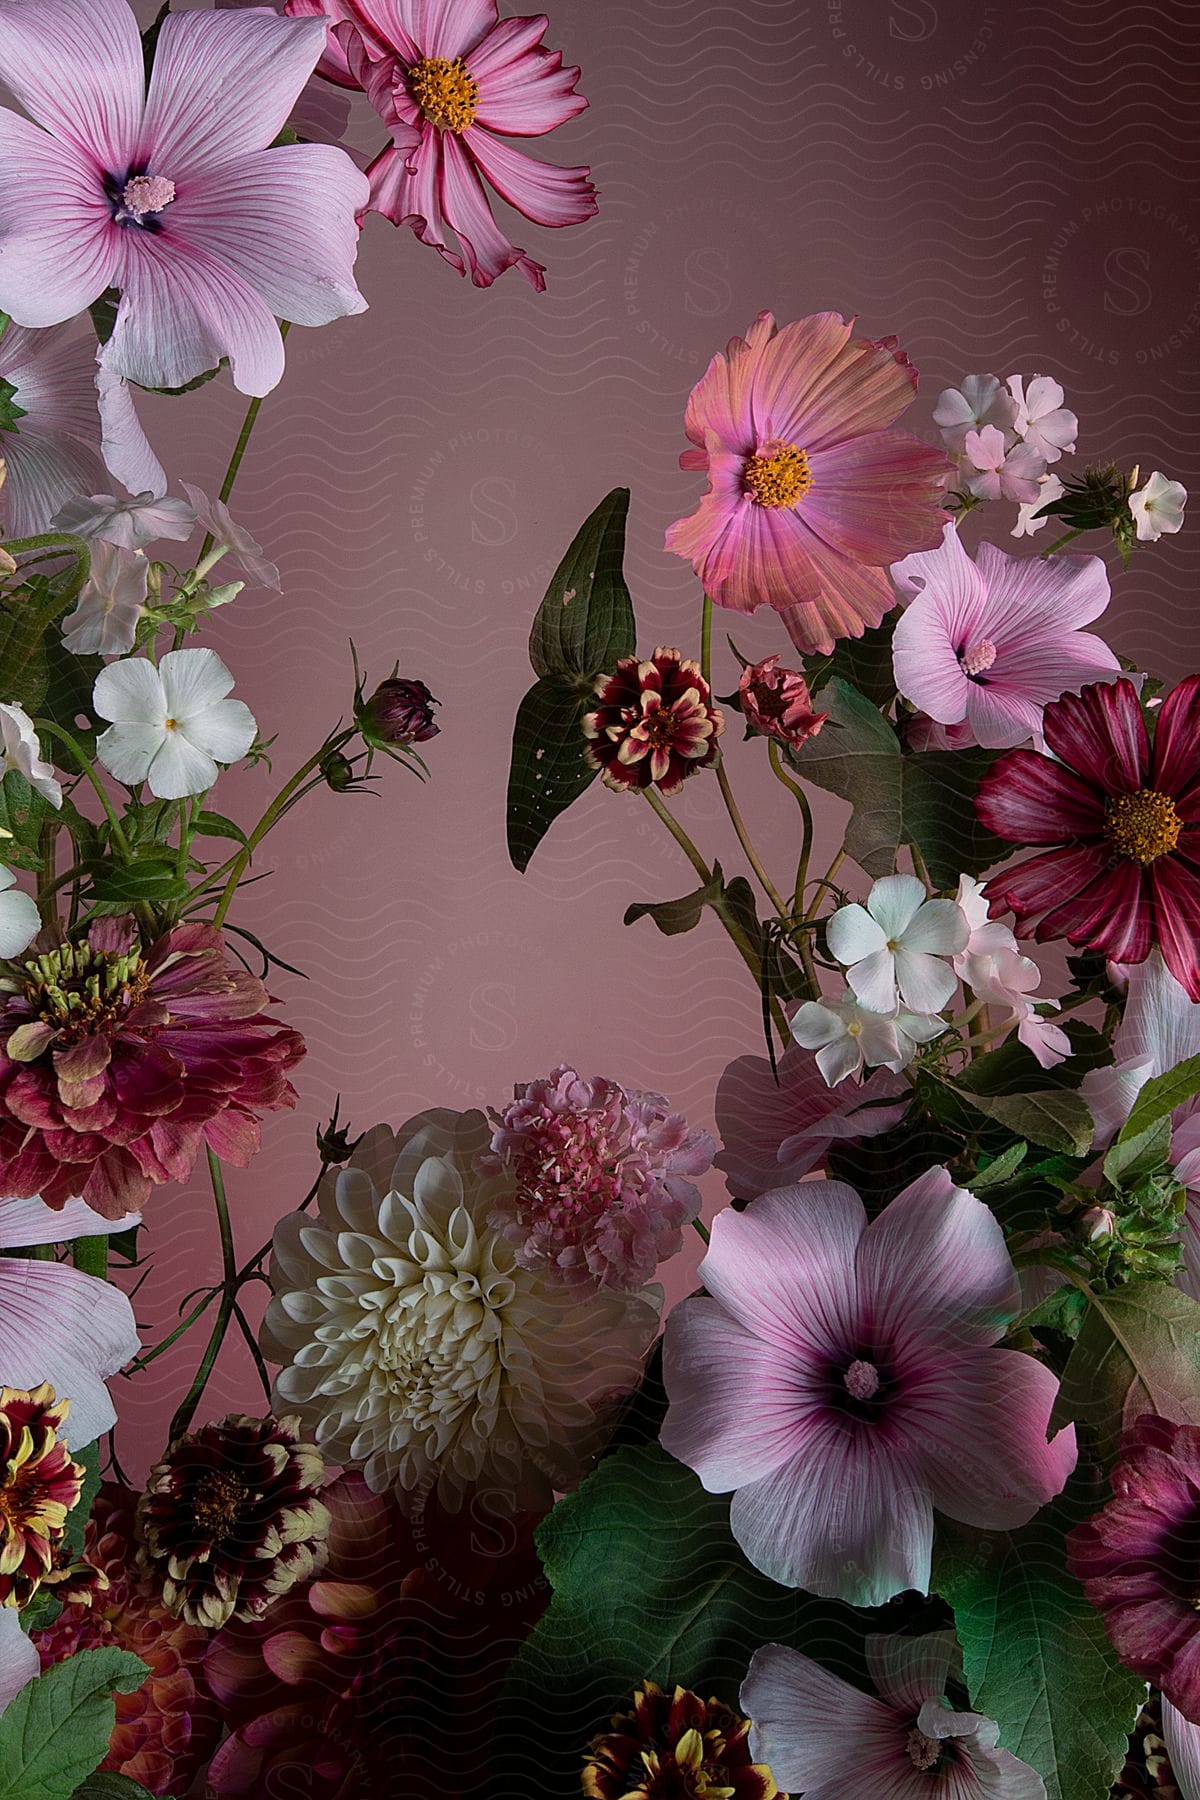 A variety of colorful flowers against a muted pink background